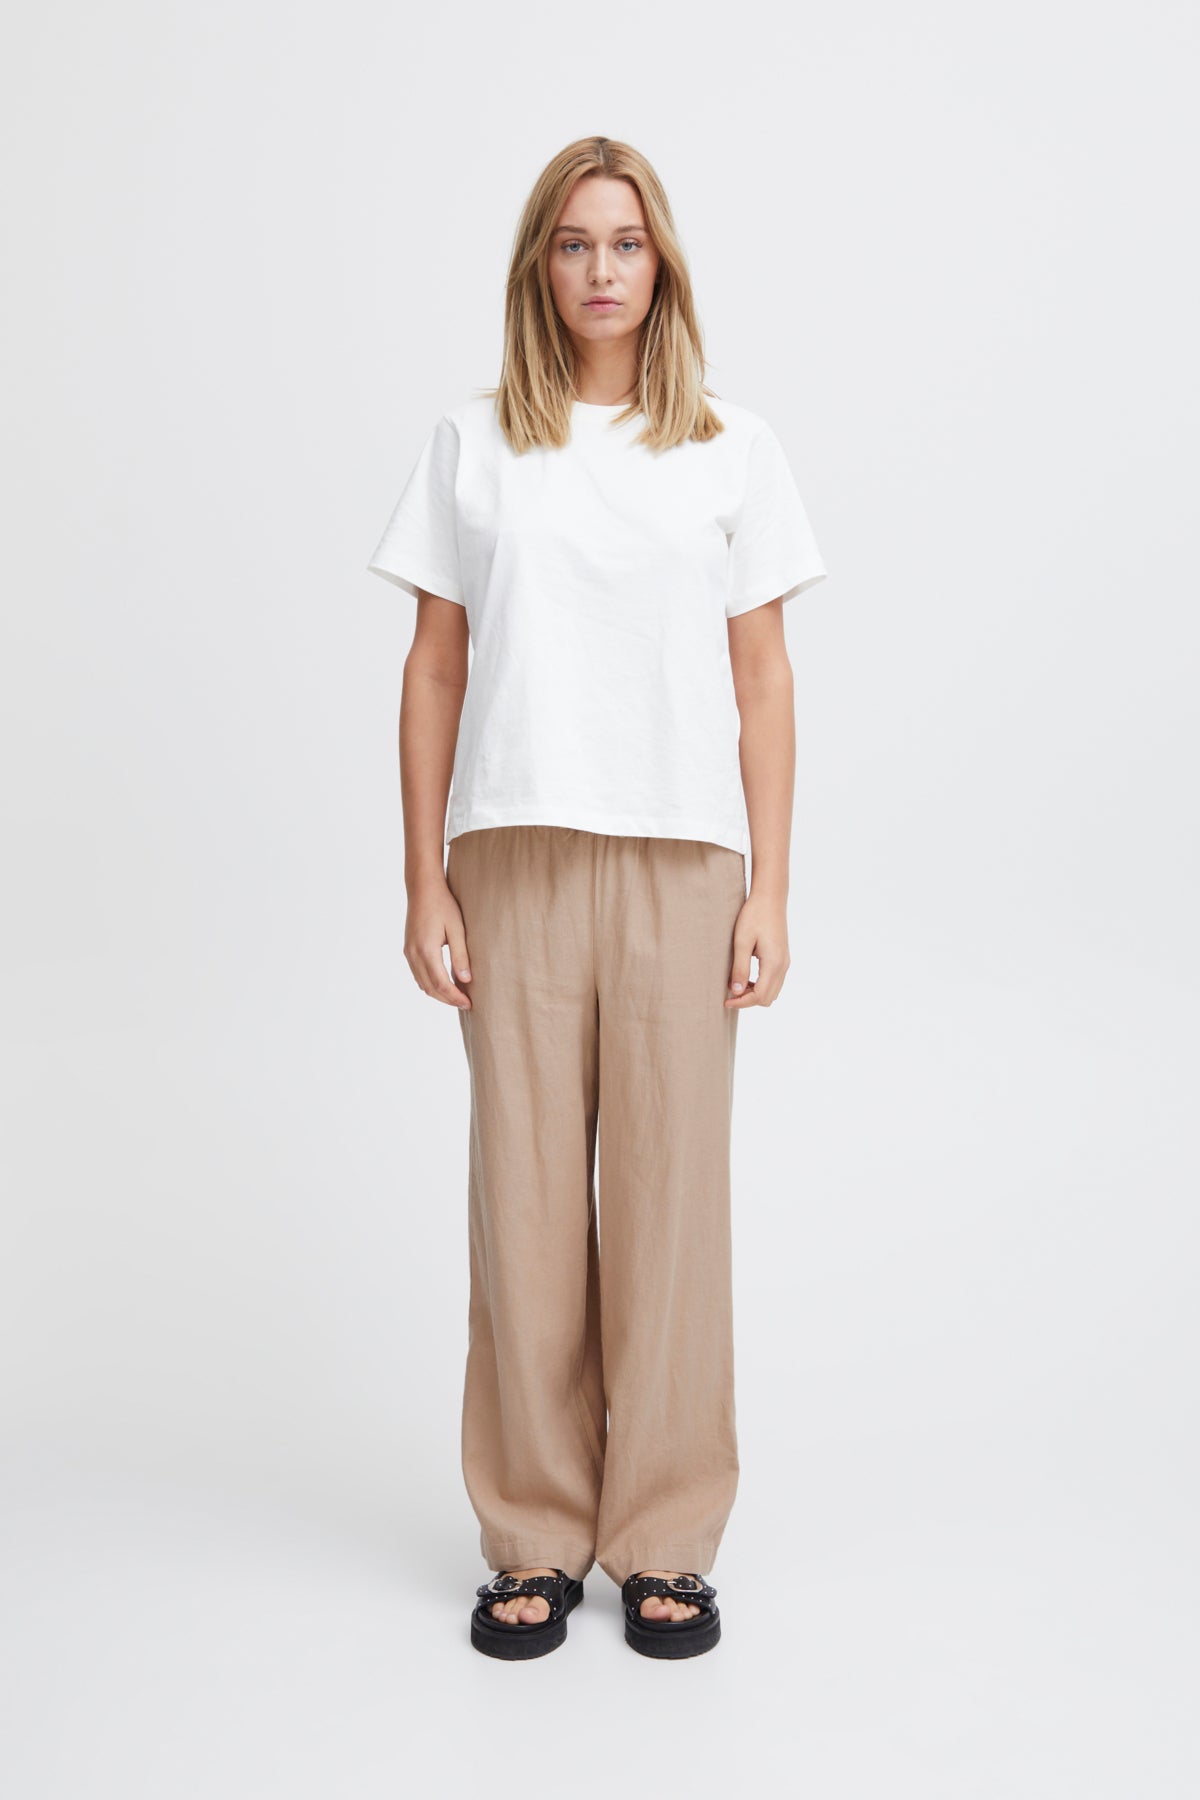 Lino Wide Leg Casual Trouser in Natural